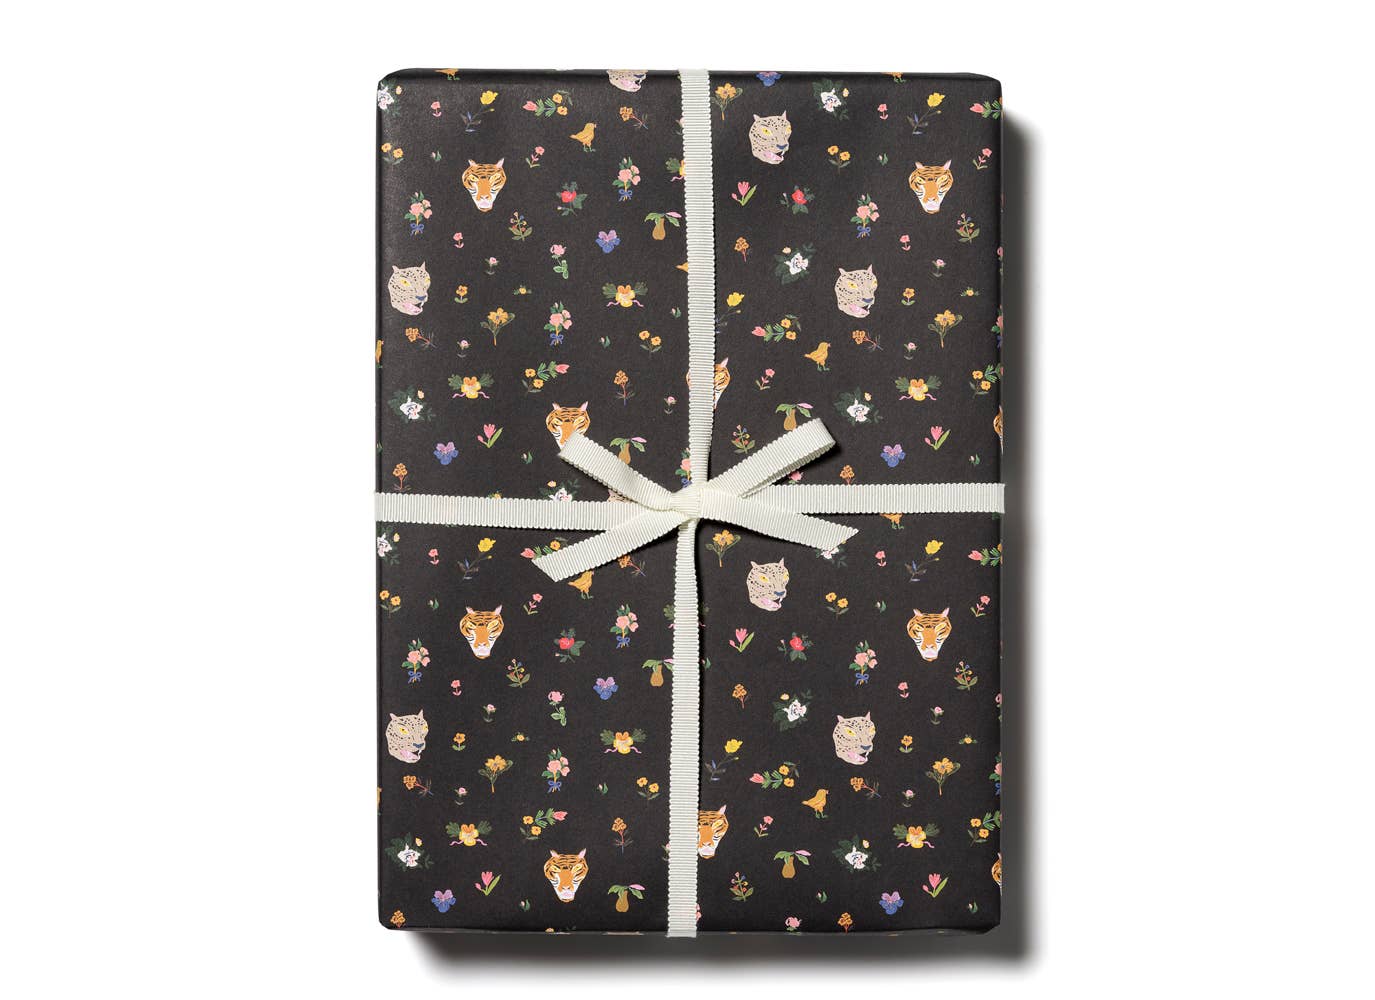 Wildcats wrapping paper rolls